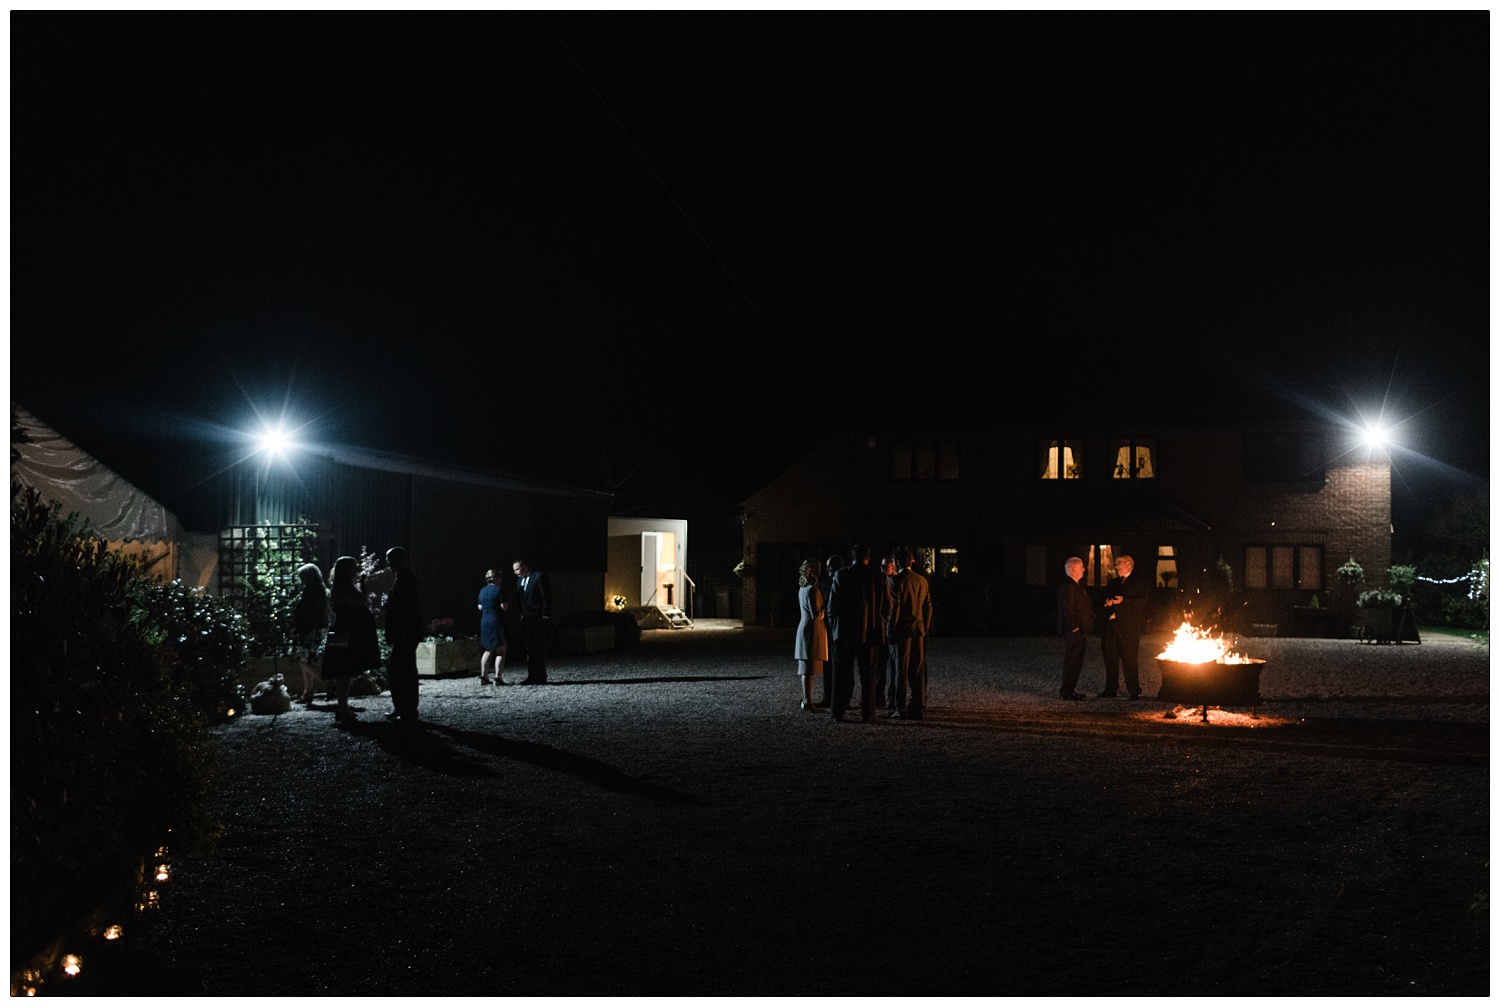 People outside at night gathered around a firepit in the garden outside the marquee and house.